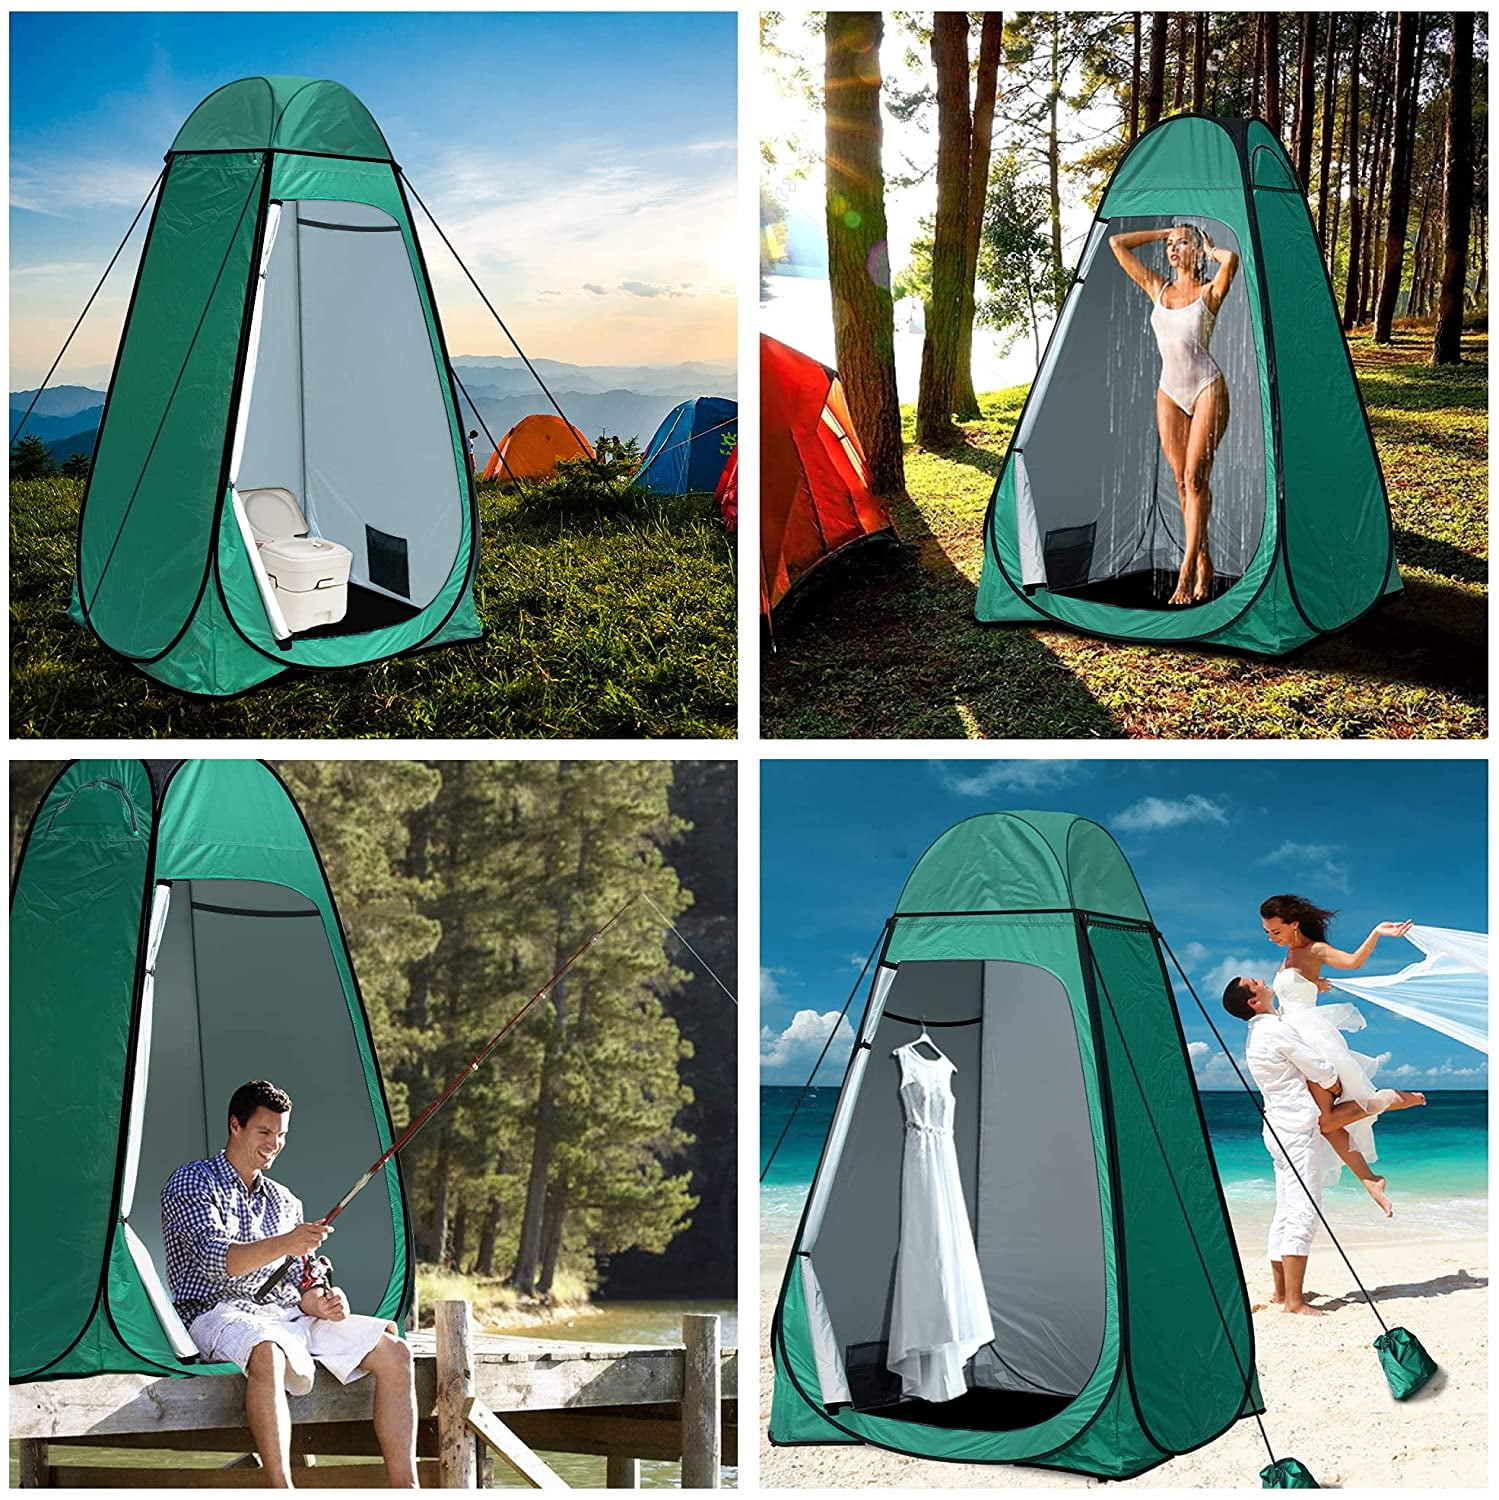 JANOON Shower Privacy Toilet Tent Beach Portable Changing Dressing Camping Pop Up tents Room Sun Sunshade Baby Outdoor Backpack Shelter Canopy 